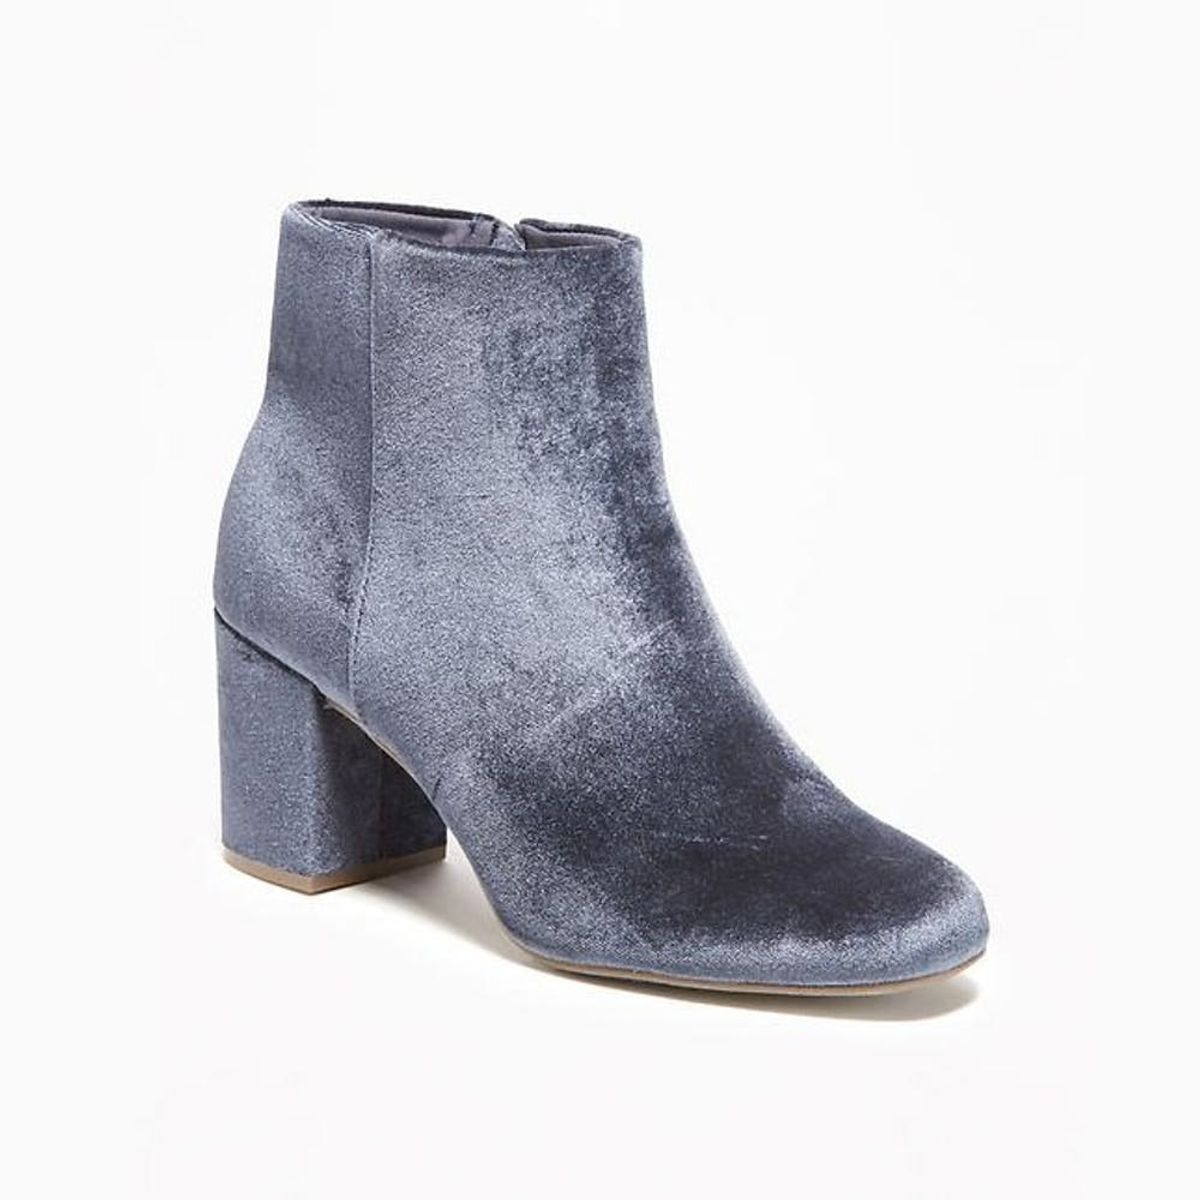 These $45 Old Navy Velvet Ankle Boots Are This Season’s Biggest Steal